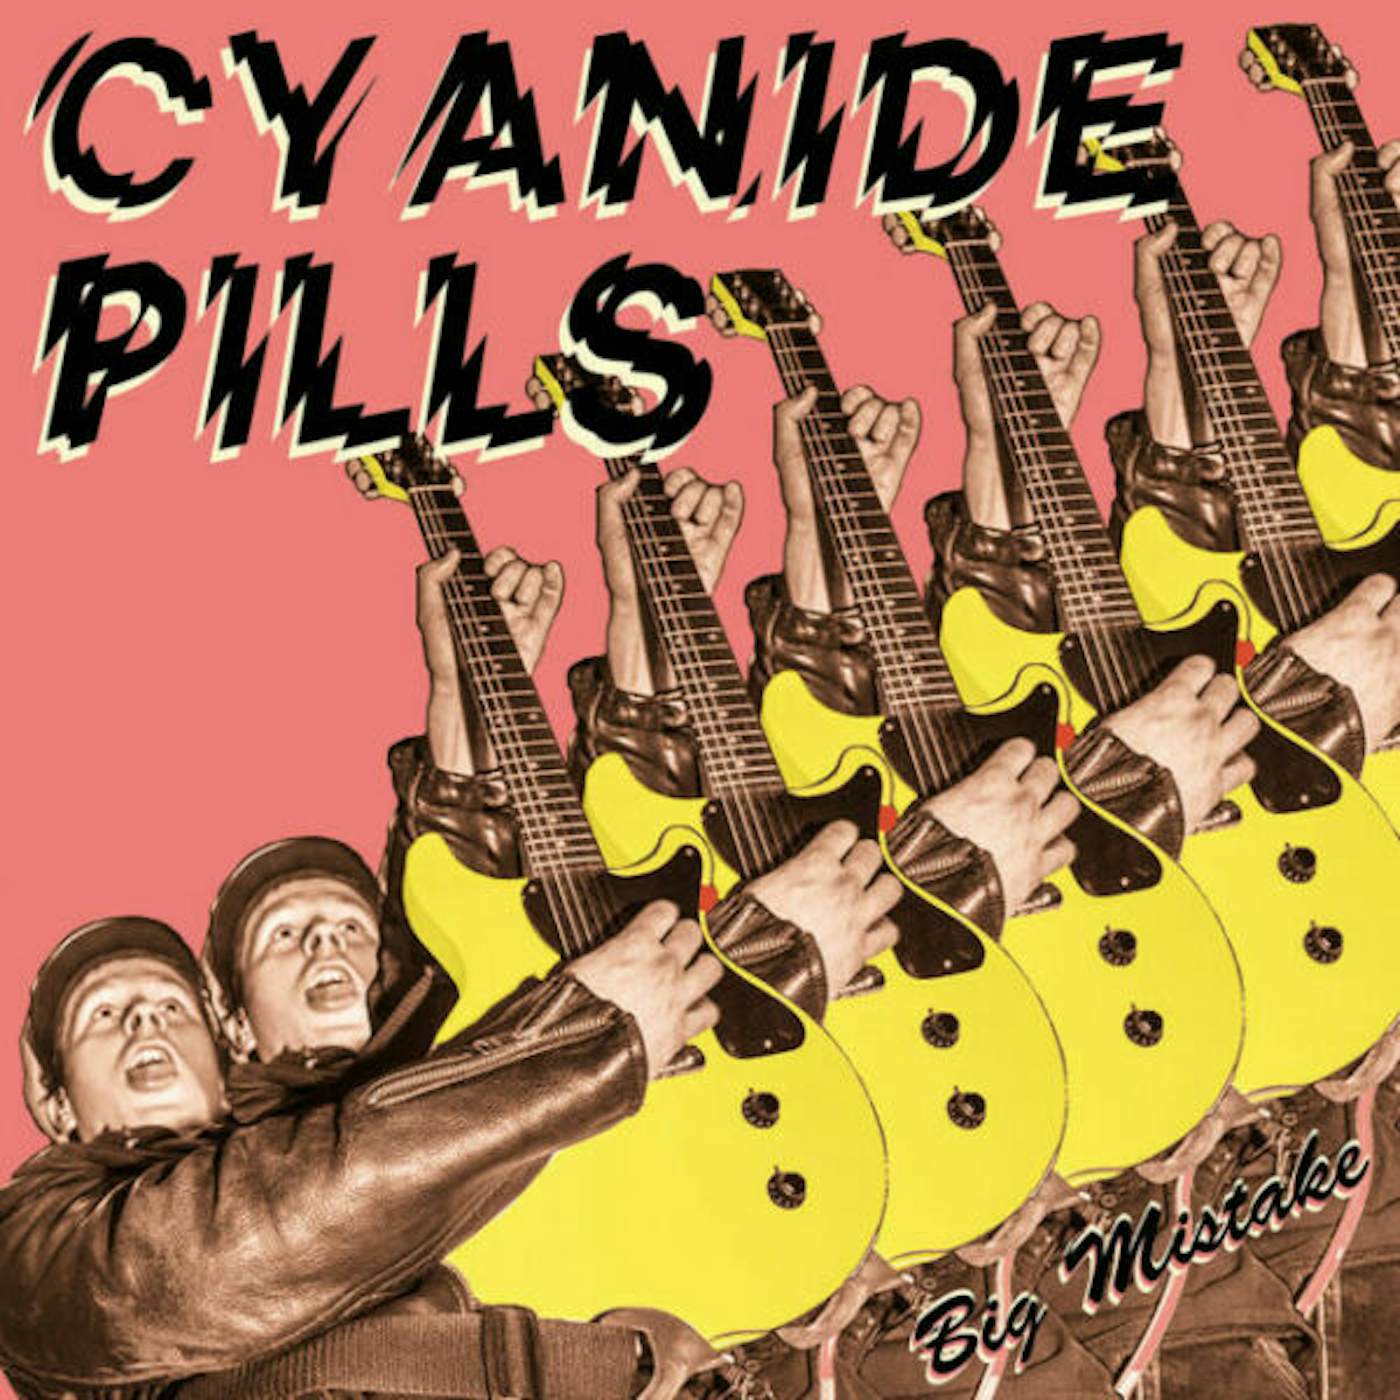 Cyanide Pills Big Mistake/My Baby's Become A Right Wing Extremist Vinyl Record